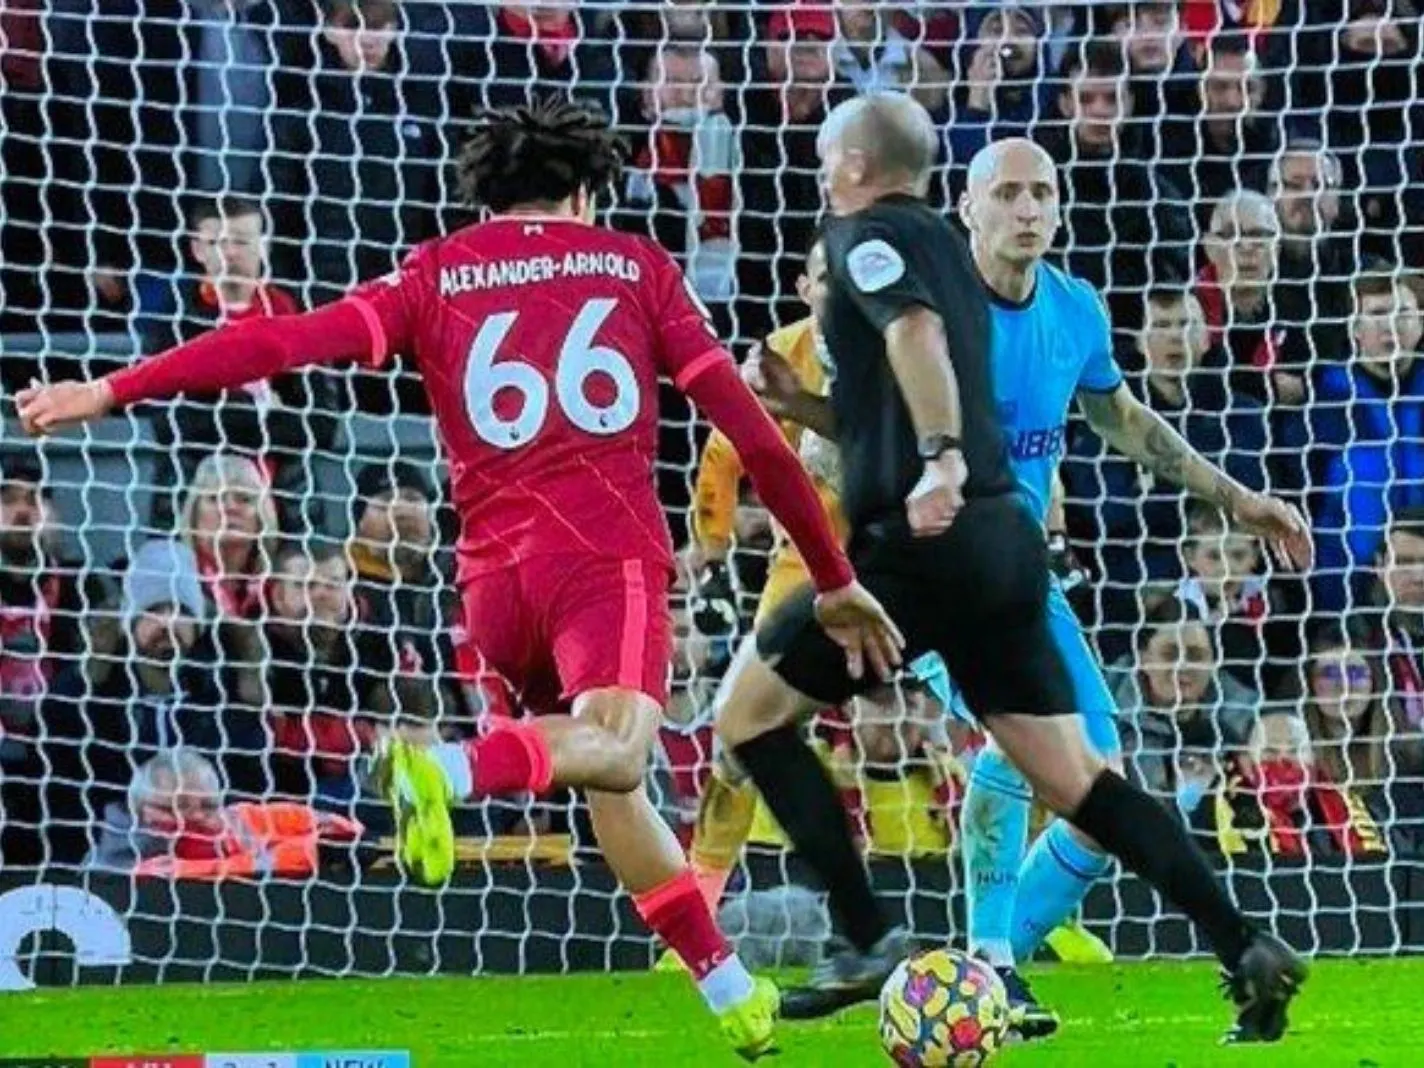 Mike Dean choose to walk in front of Trent Alexander-Arnold's shot when he could have backed away